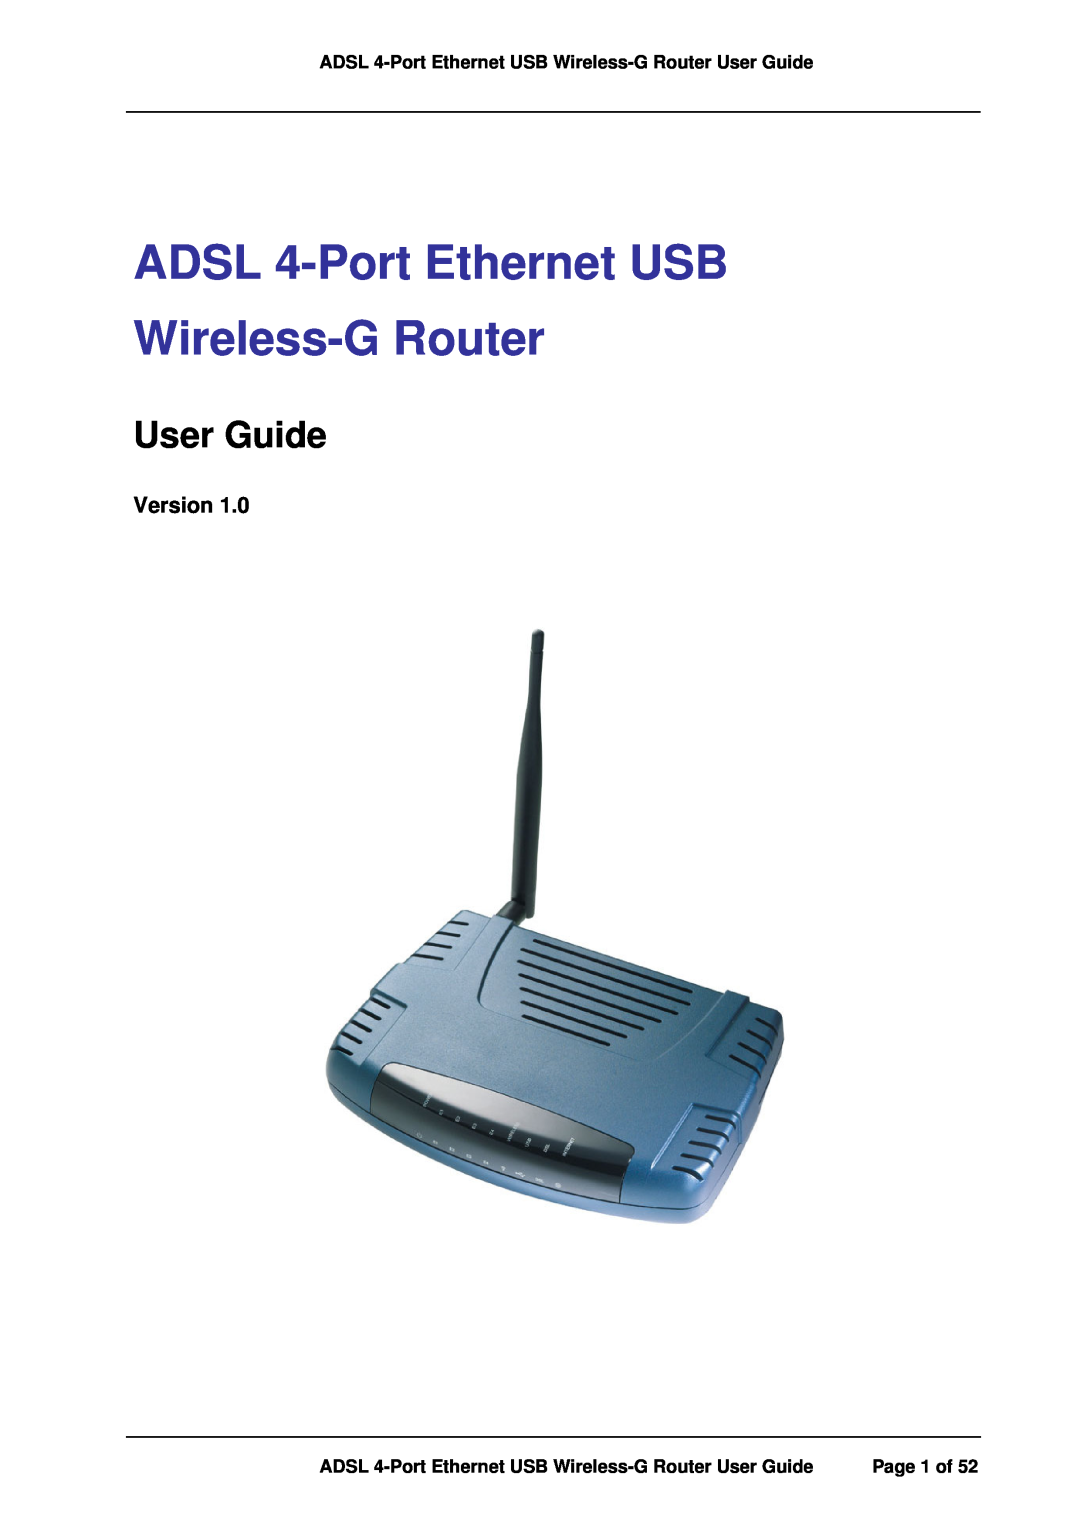 APC manual ADSL 4-Port Ethernet USB Wireless-G Router, User Guide, Version, Page 1 of 